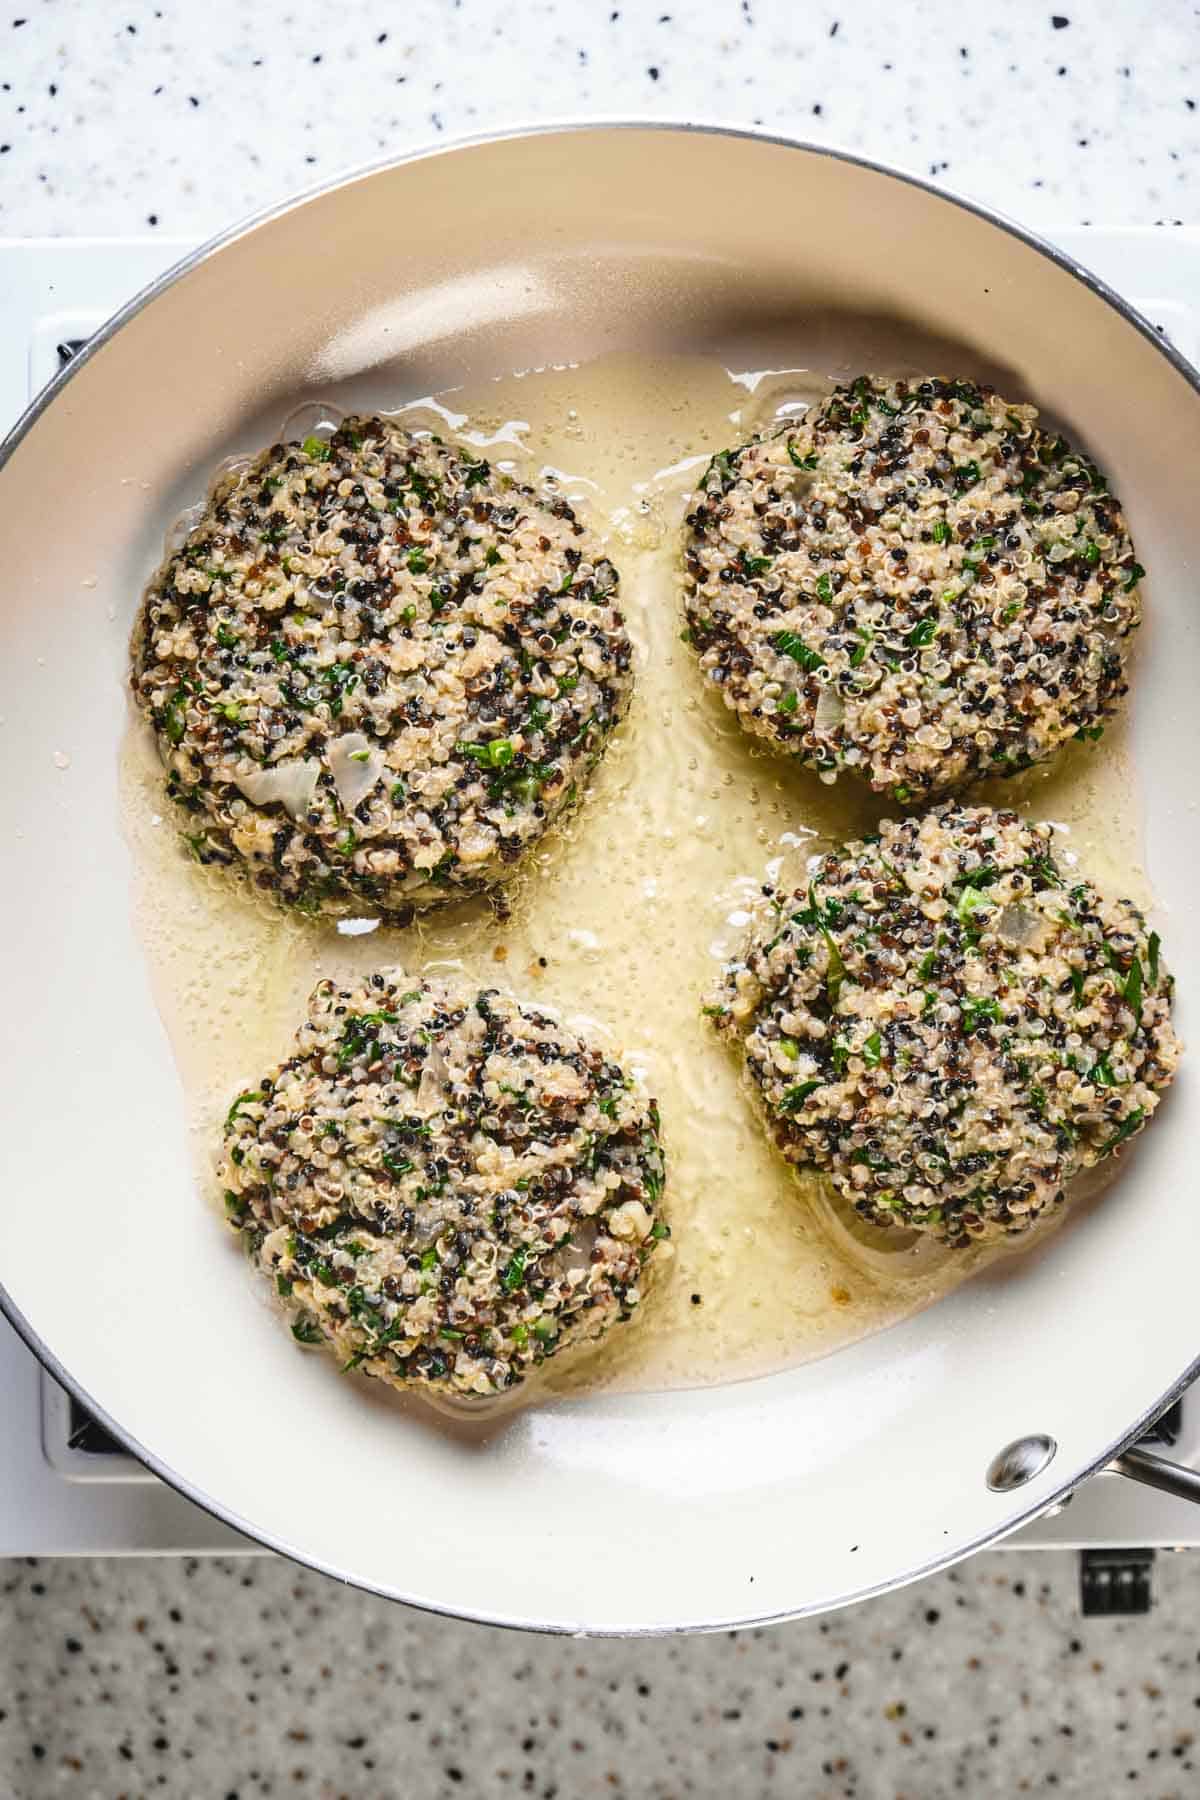 Kale and quinoa cakes frying in a pan.